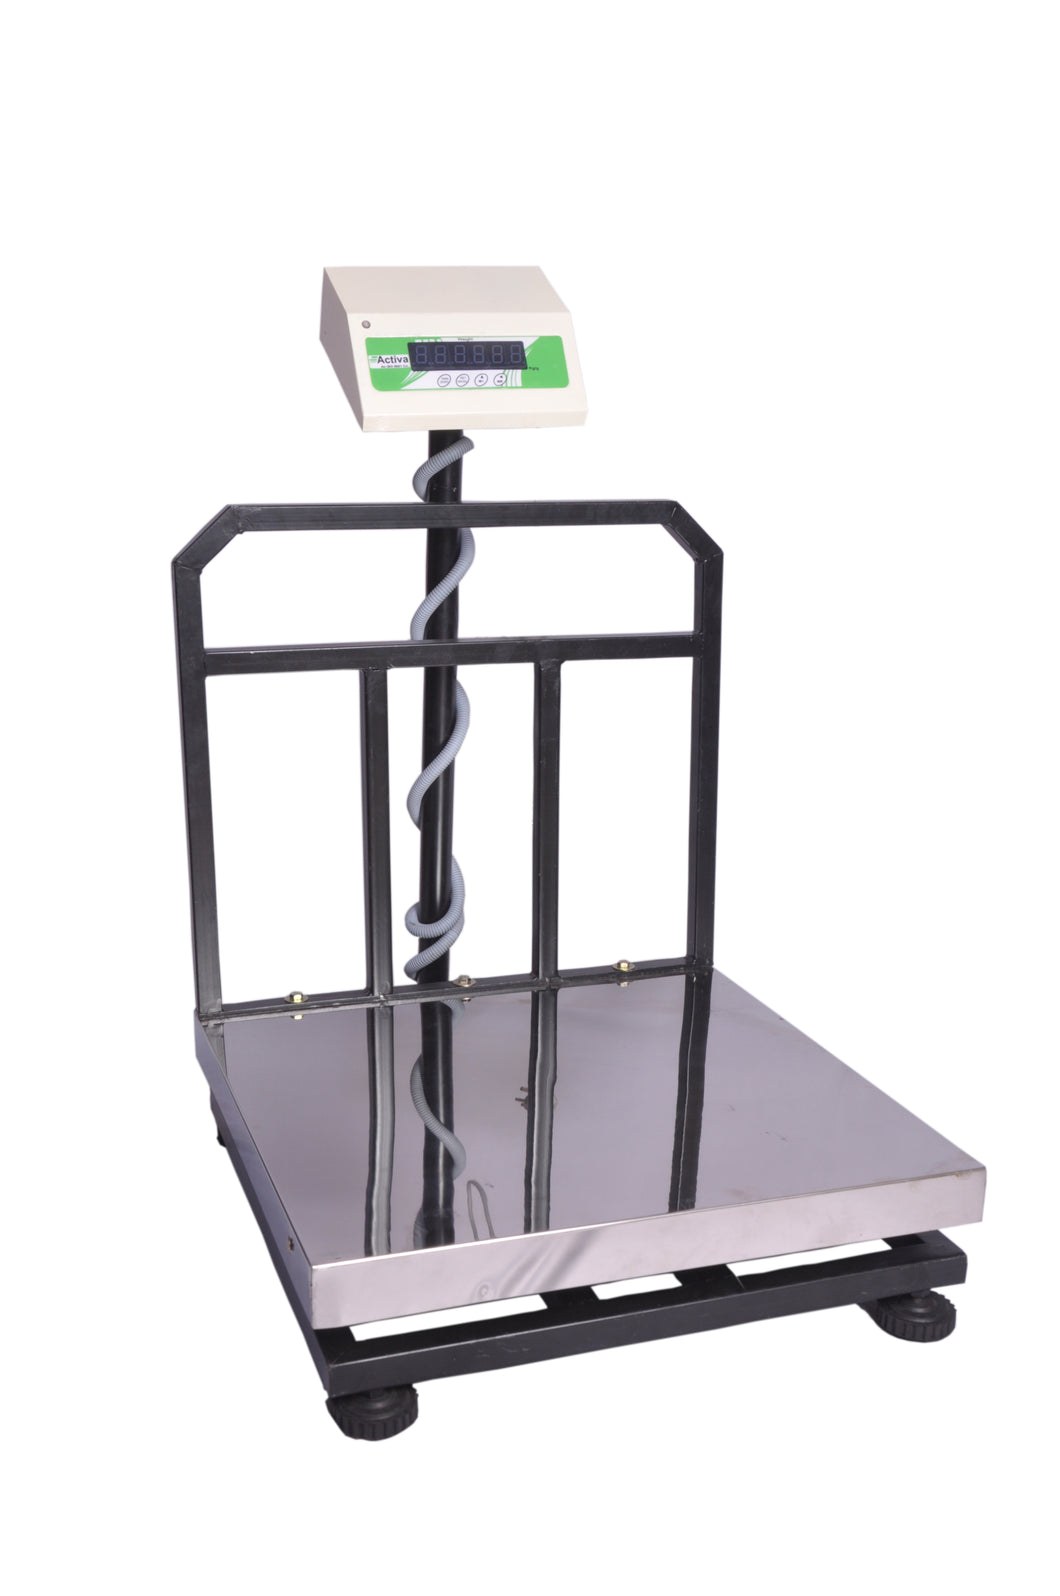 ACTIVA 500KG WEIGHING SCALE,STAINLESS STEEL COMMERCIAL WEIGHT MACHINE FOR INDUSTRY